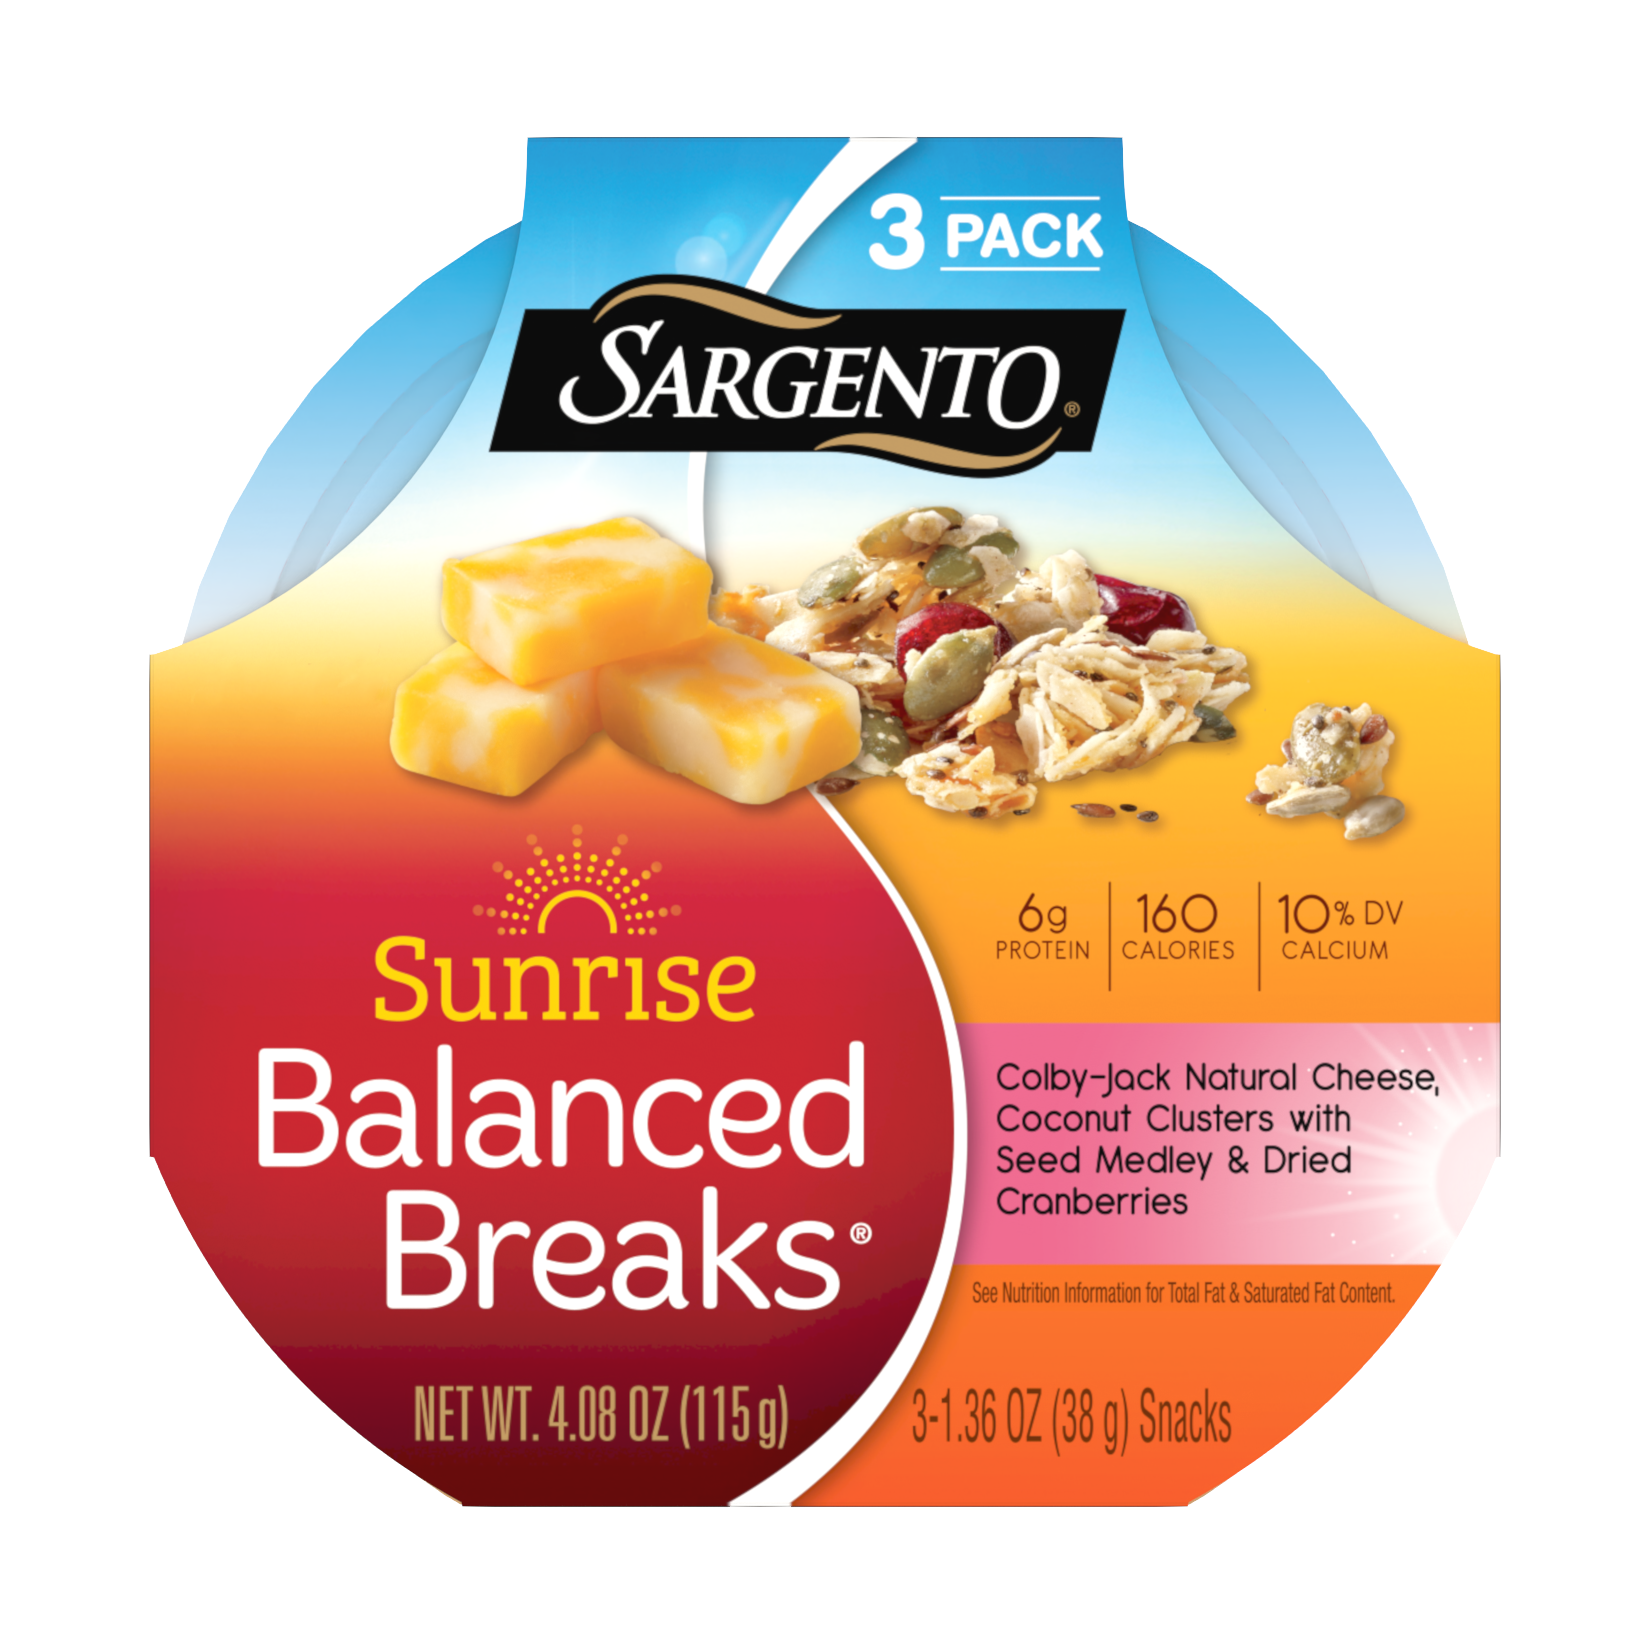 Sargento® Sunrise Balanced Breaks®, Colby-Jack Natural Cheese, Coconut Clusters with Seed Medley, and Dried Cranberries